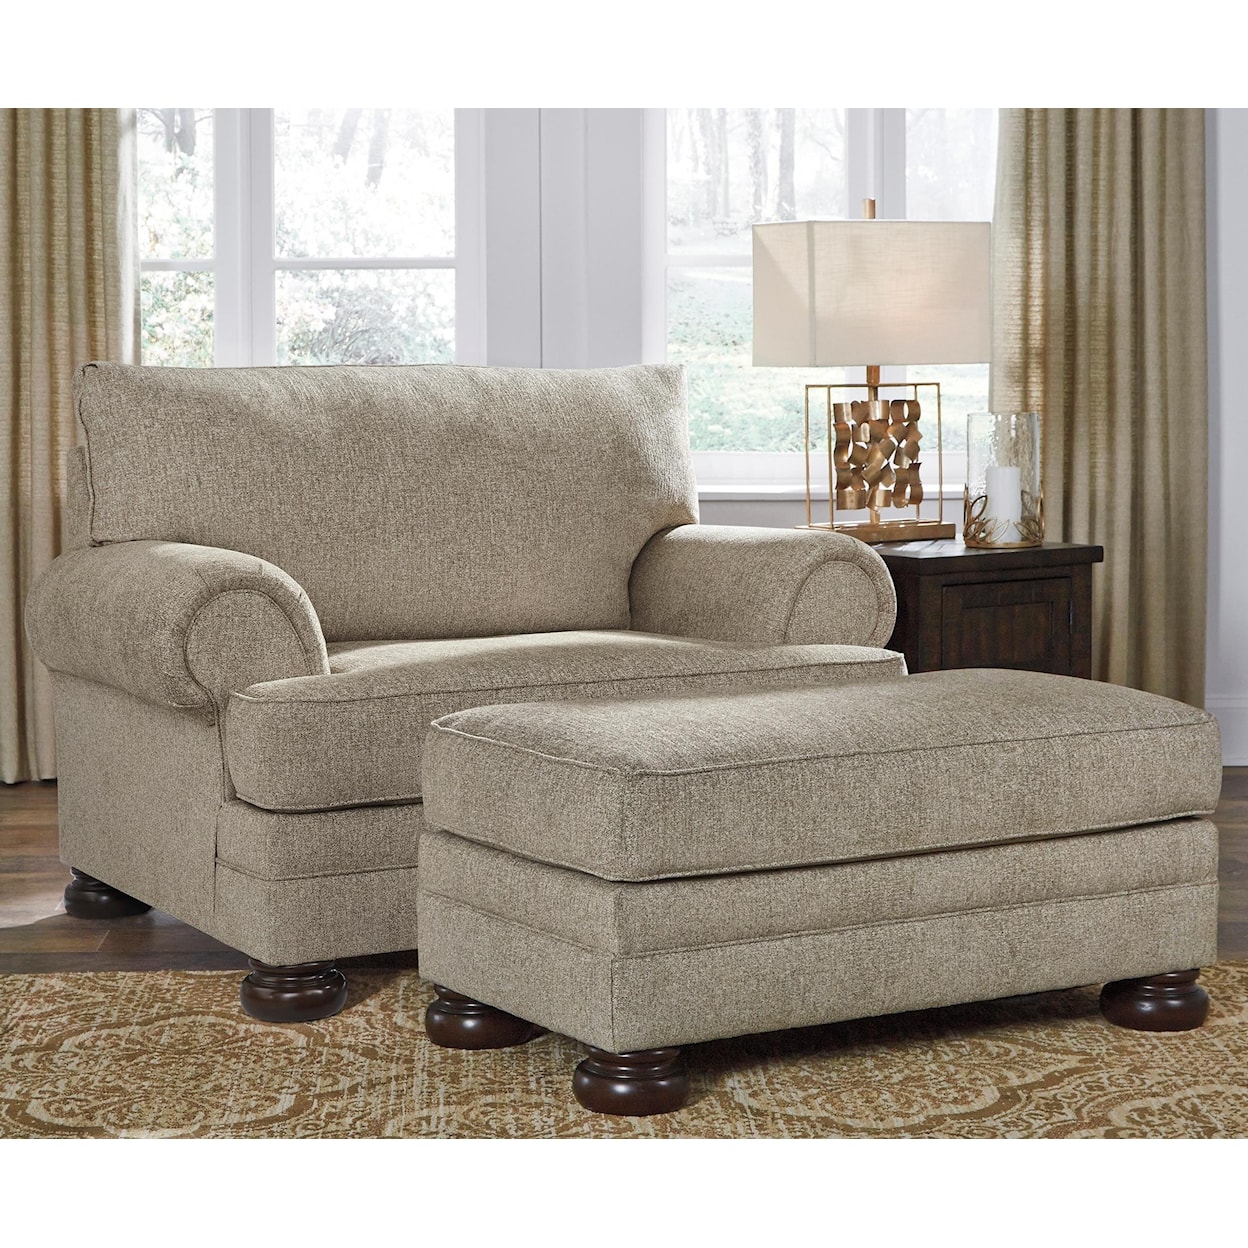 Signature Design by Ashley Furniture Kananwood Chair and a Half and Ottoman